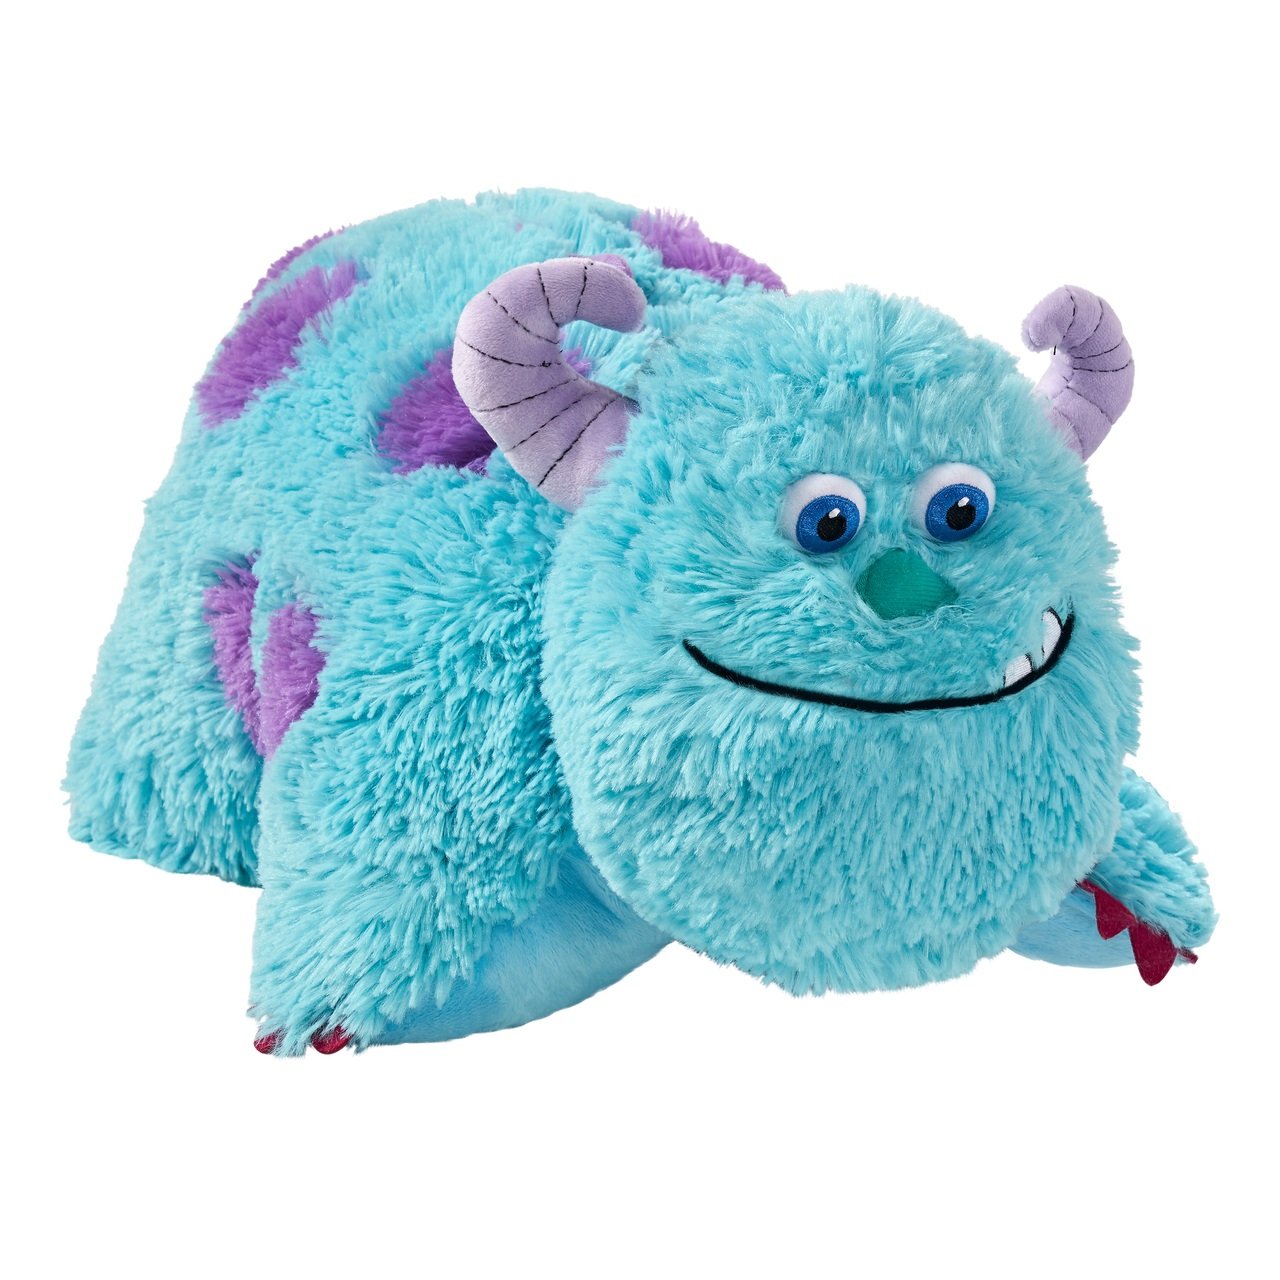 https://www.snaptaste.com/wp-content/uploads/2021/09/Sully-Pillow-Pet_CJ-Products.jpg